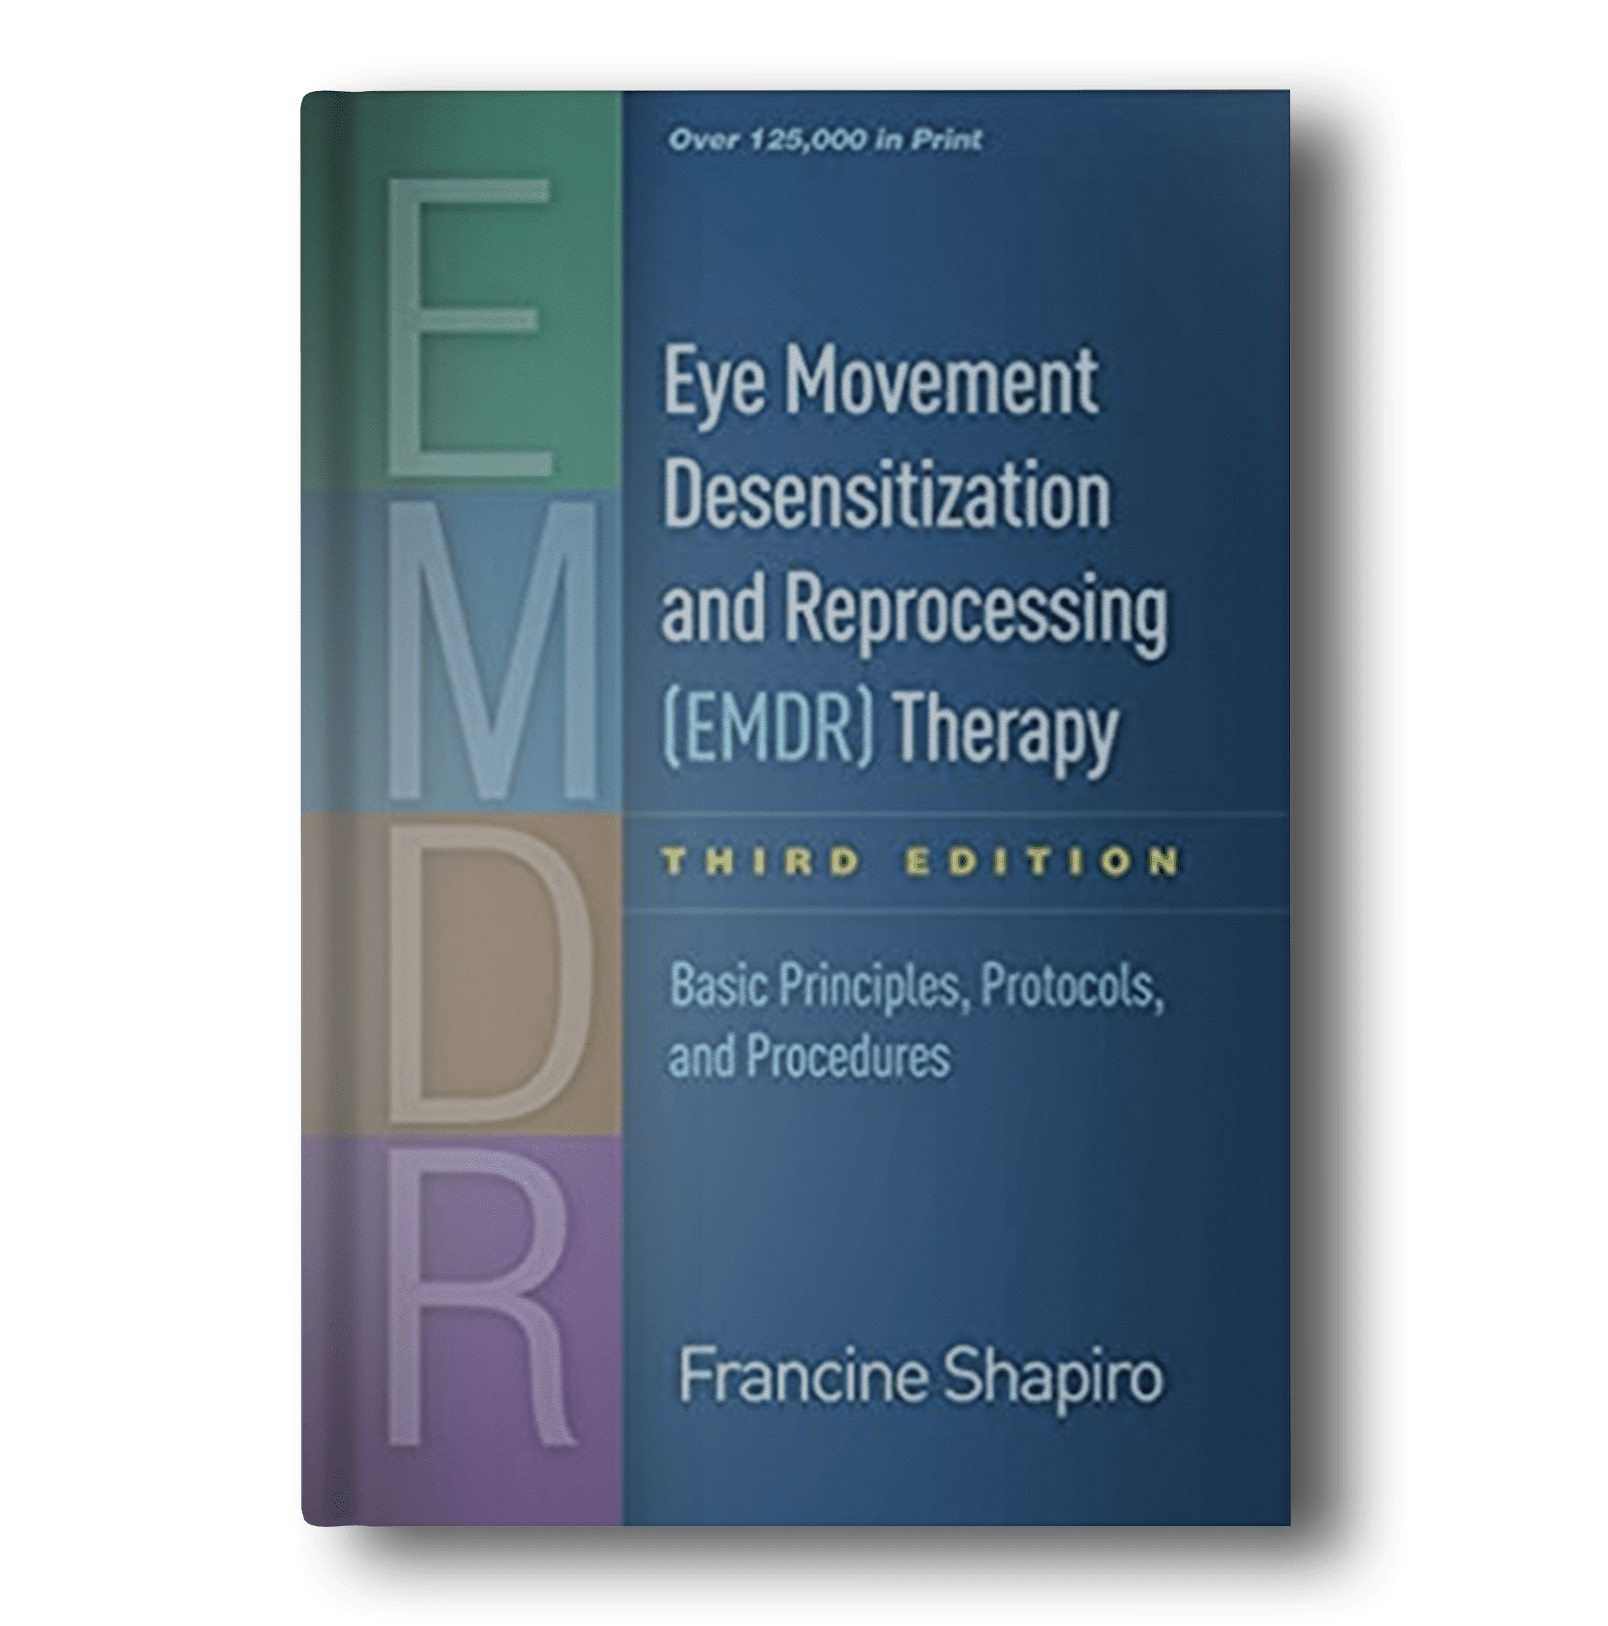 Eye-Movement-Desensitization-and-Reprocessing-(EMDR)-Therapy-Third-Edition-2